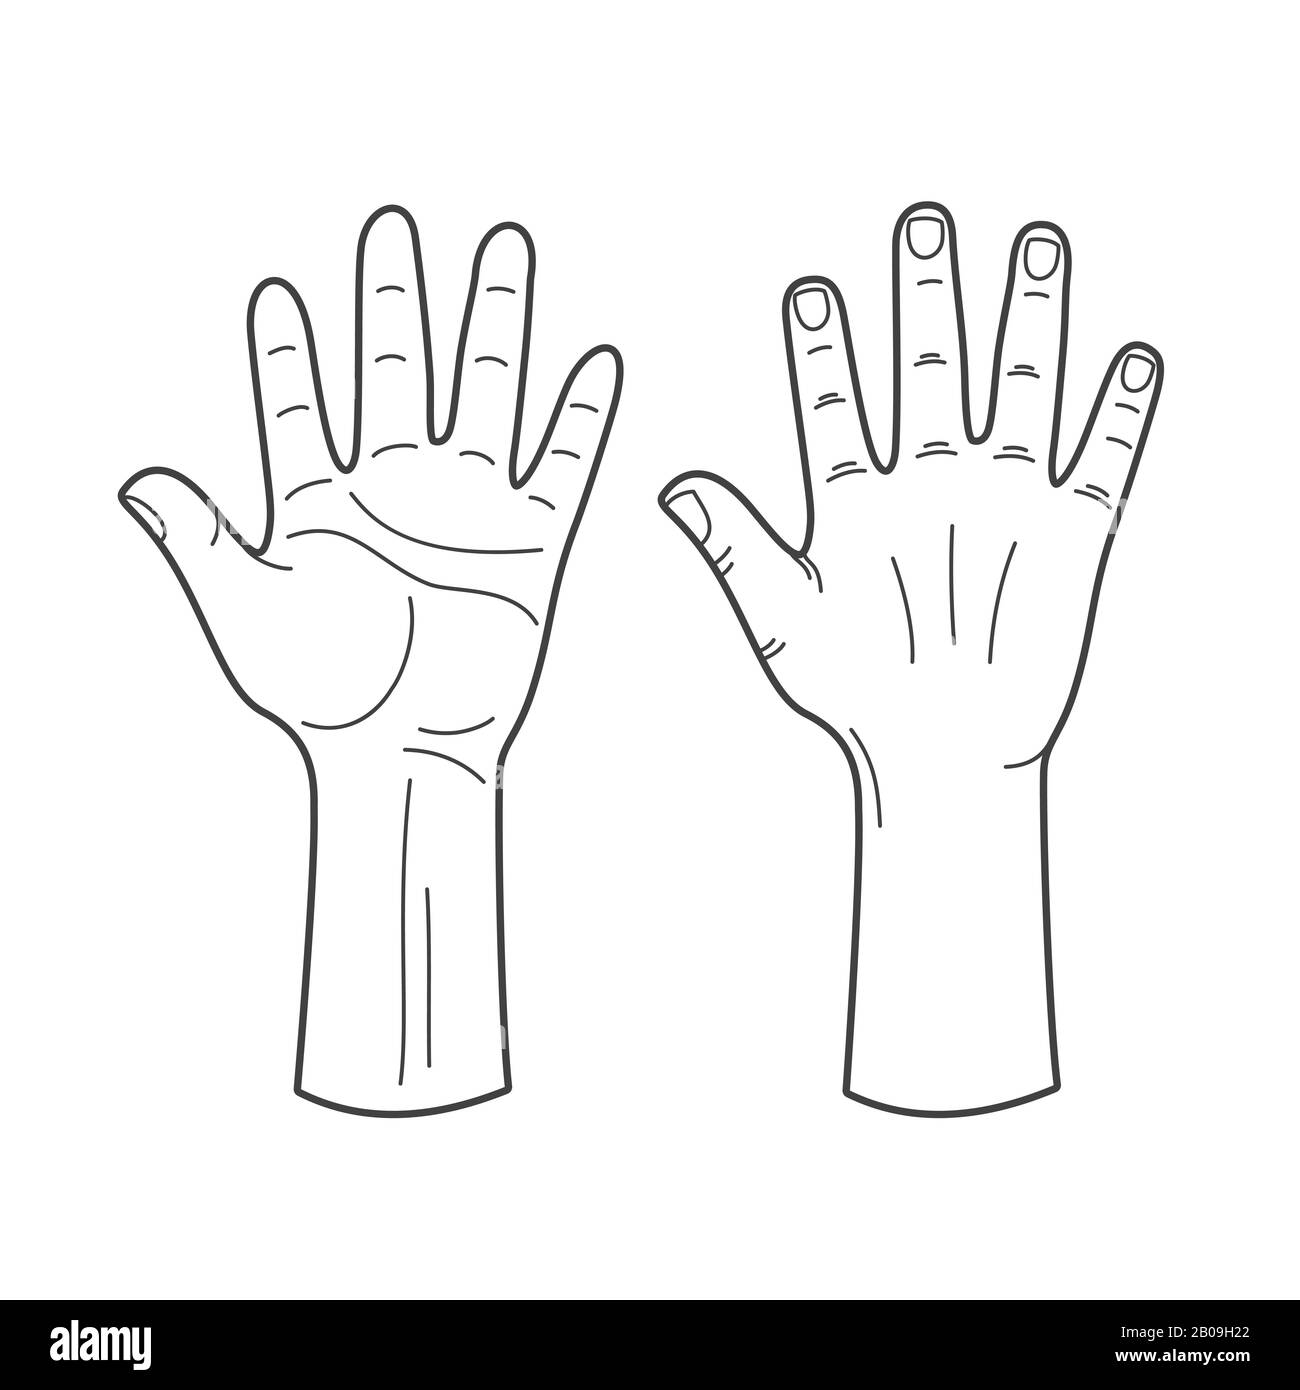 Hands 25 Hand Shapes Simple Outlines Stock Vector (Royalty Free